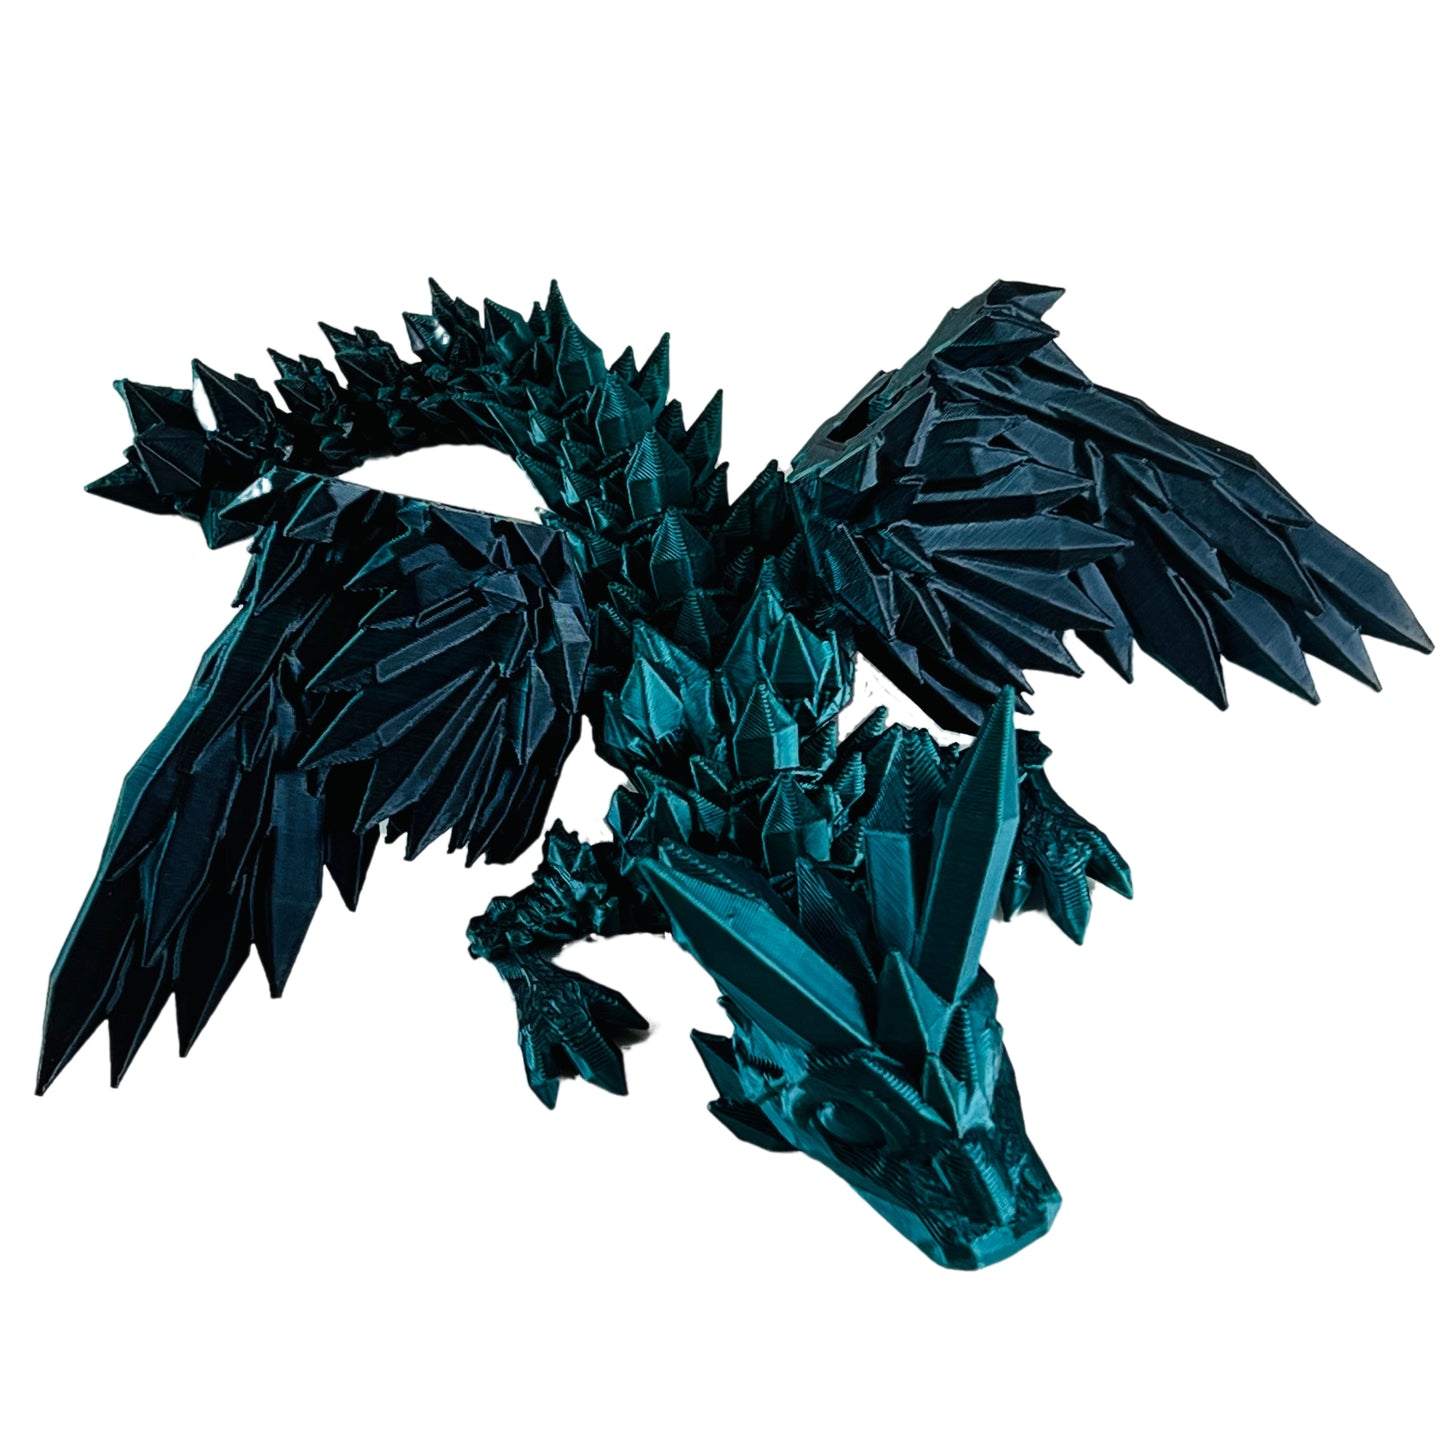 3D Crystal Dragon with Wings - Small